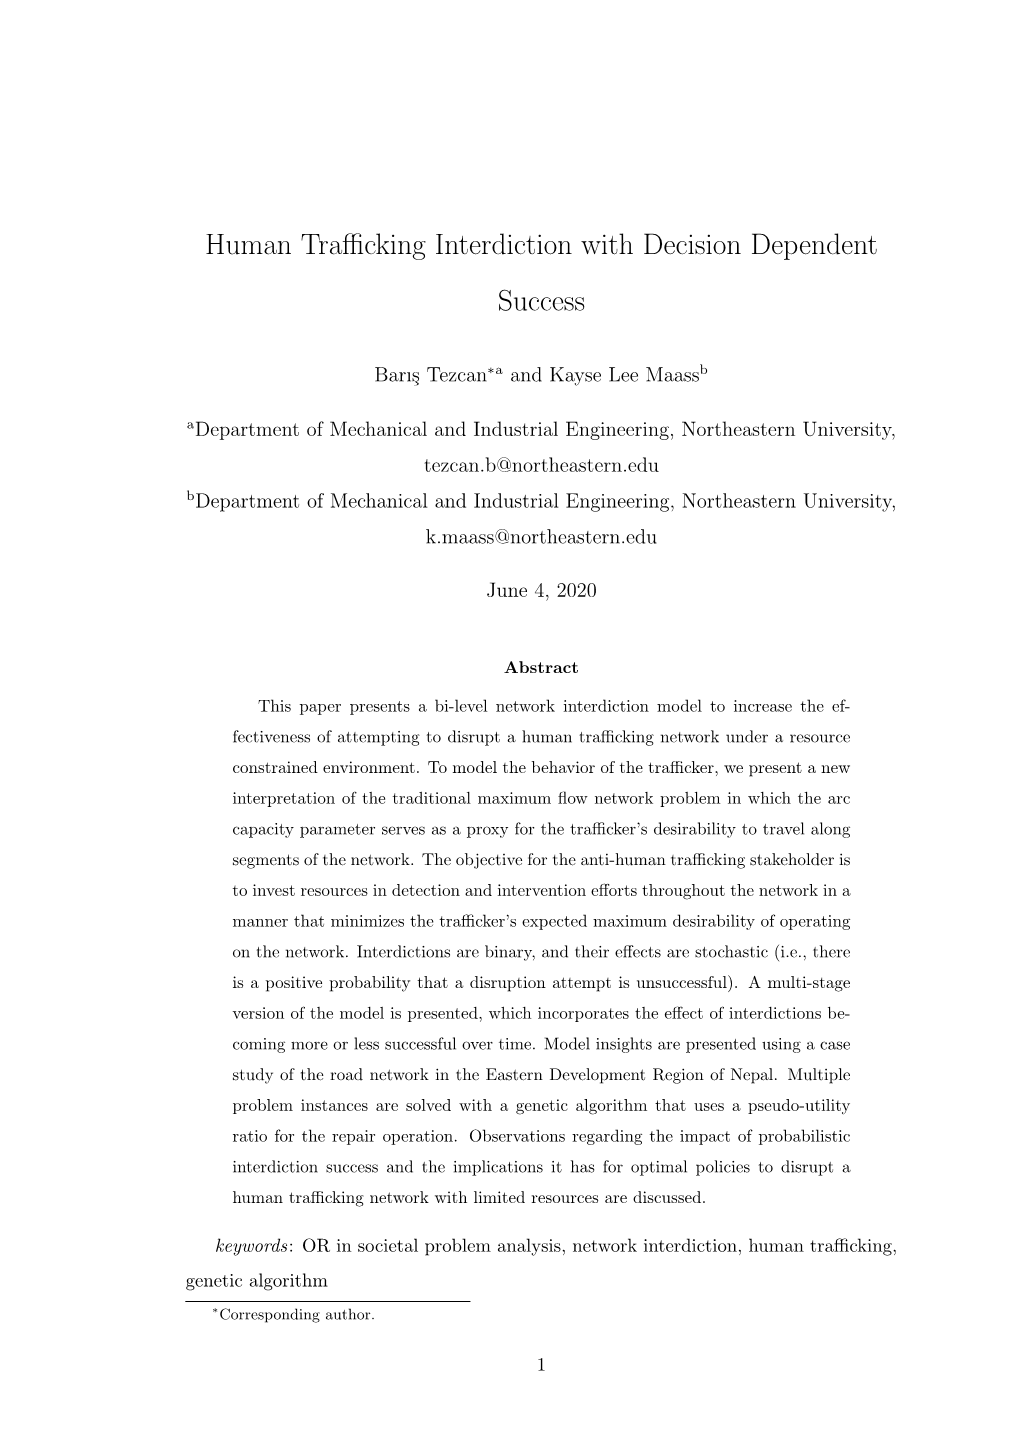 Human Trafficking Interdiction with Decision Dependent Success